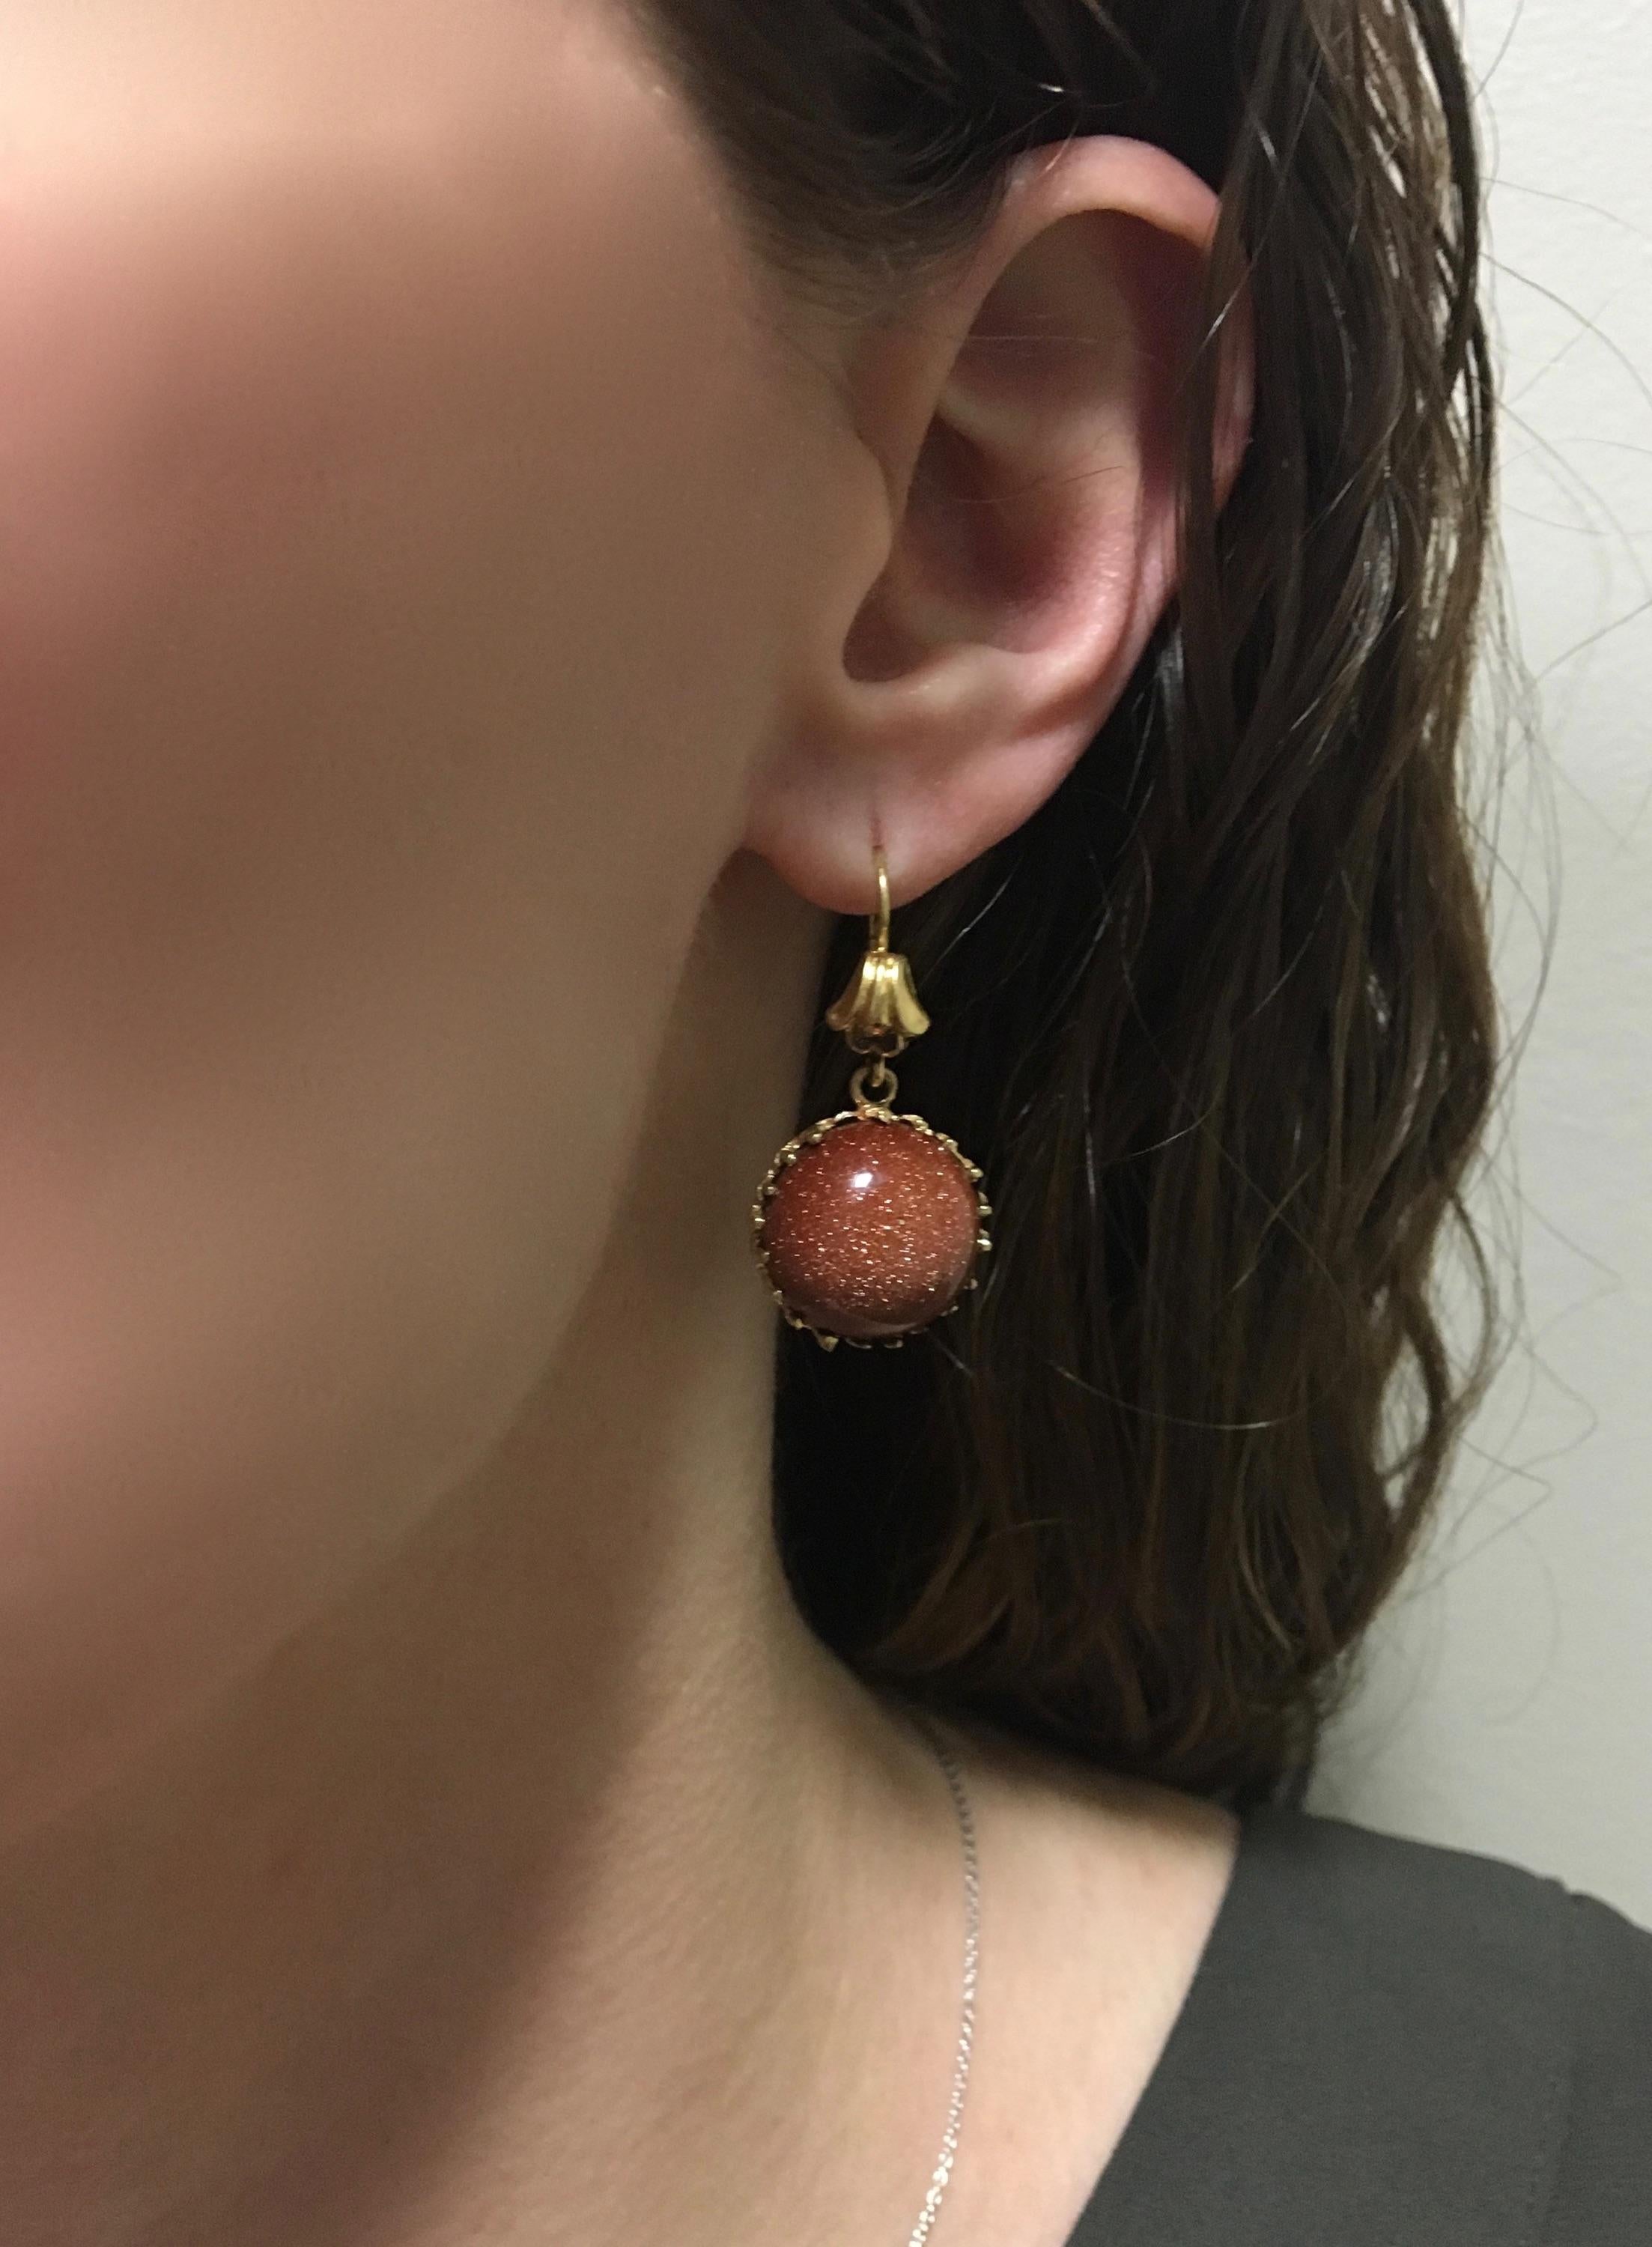 These beautiful lever back style earrings feature two Round Cabochon Cut Sunstones set in 18k yellow gold.

Gemstone: Sunstone
Gemstone Carat Weight: Approximately 17mm Round
Gemstone Cut: 2 Round Cabochon Cut
Metal: 18K Yellow Gold 
Marked/Tested: